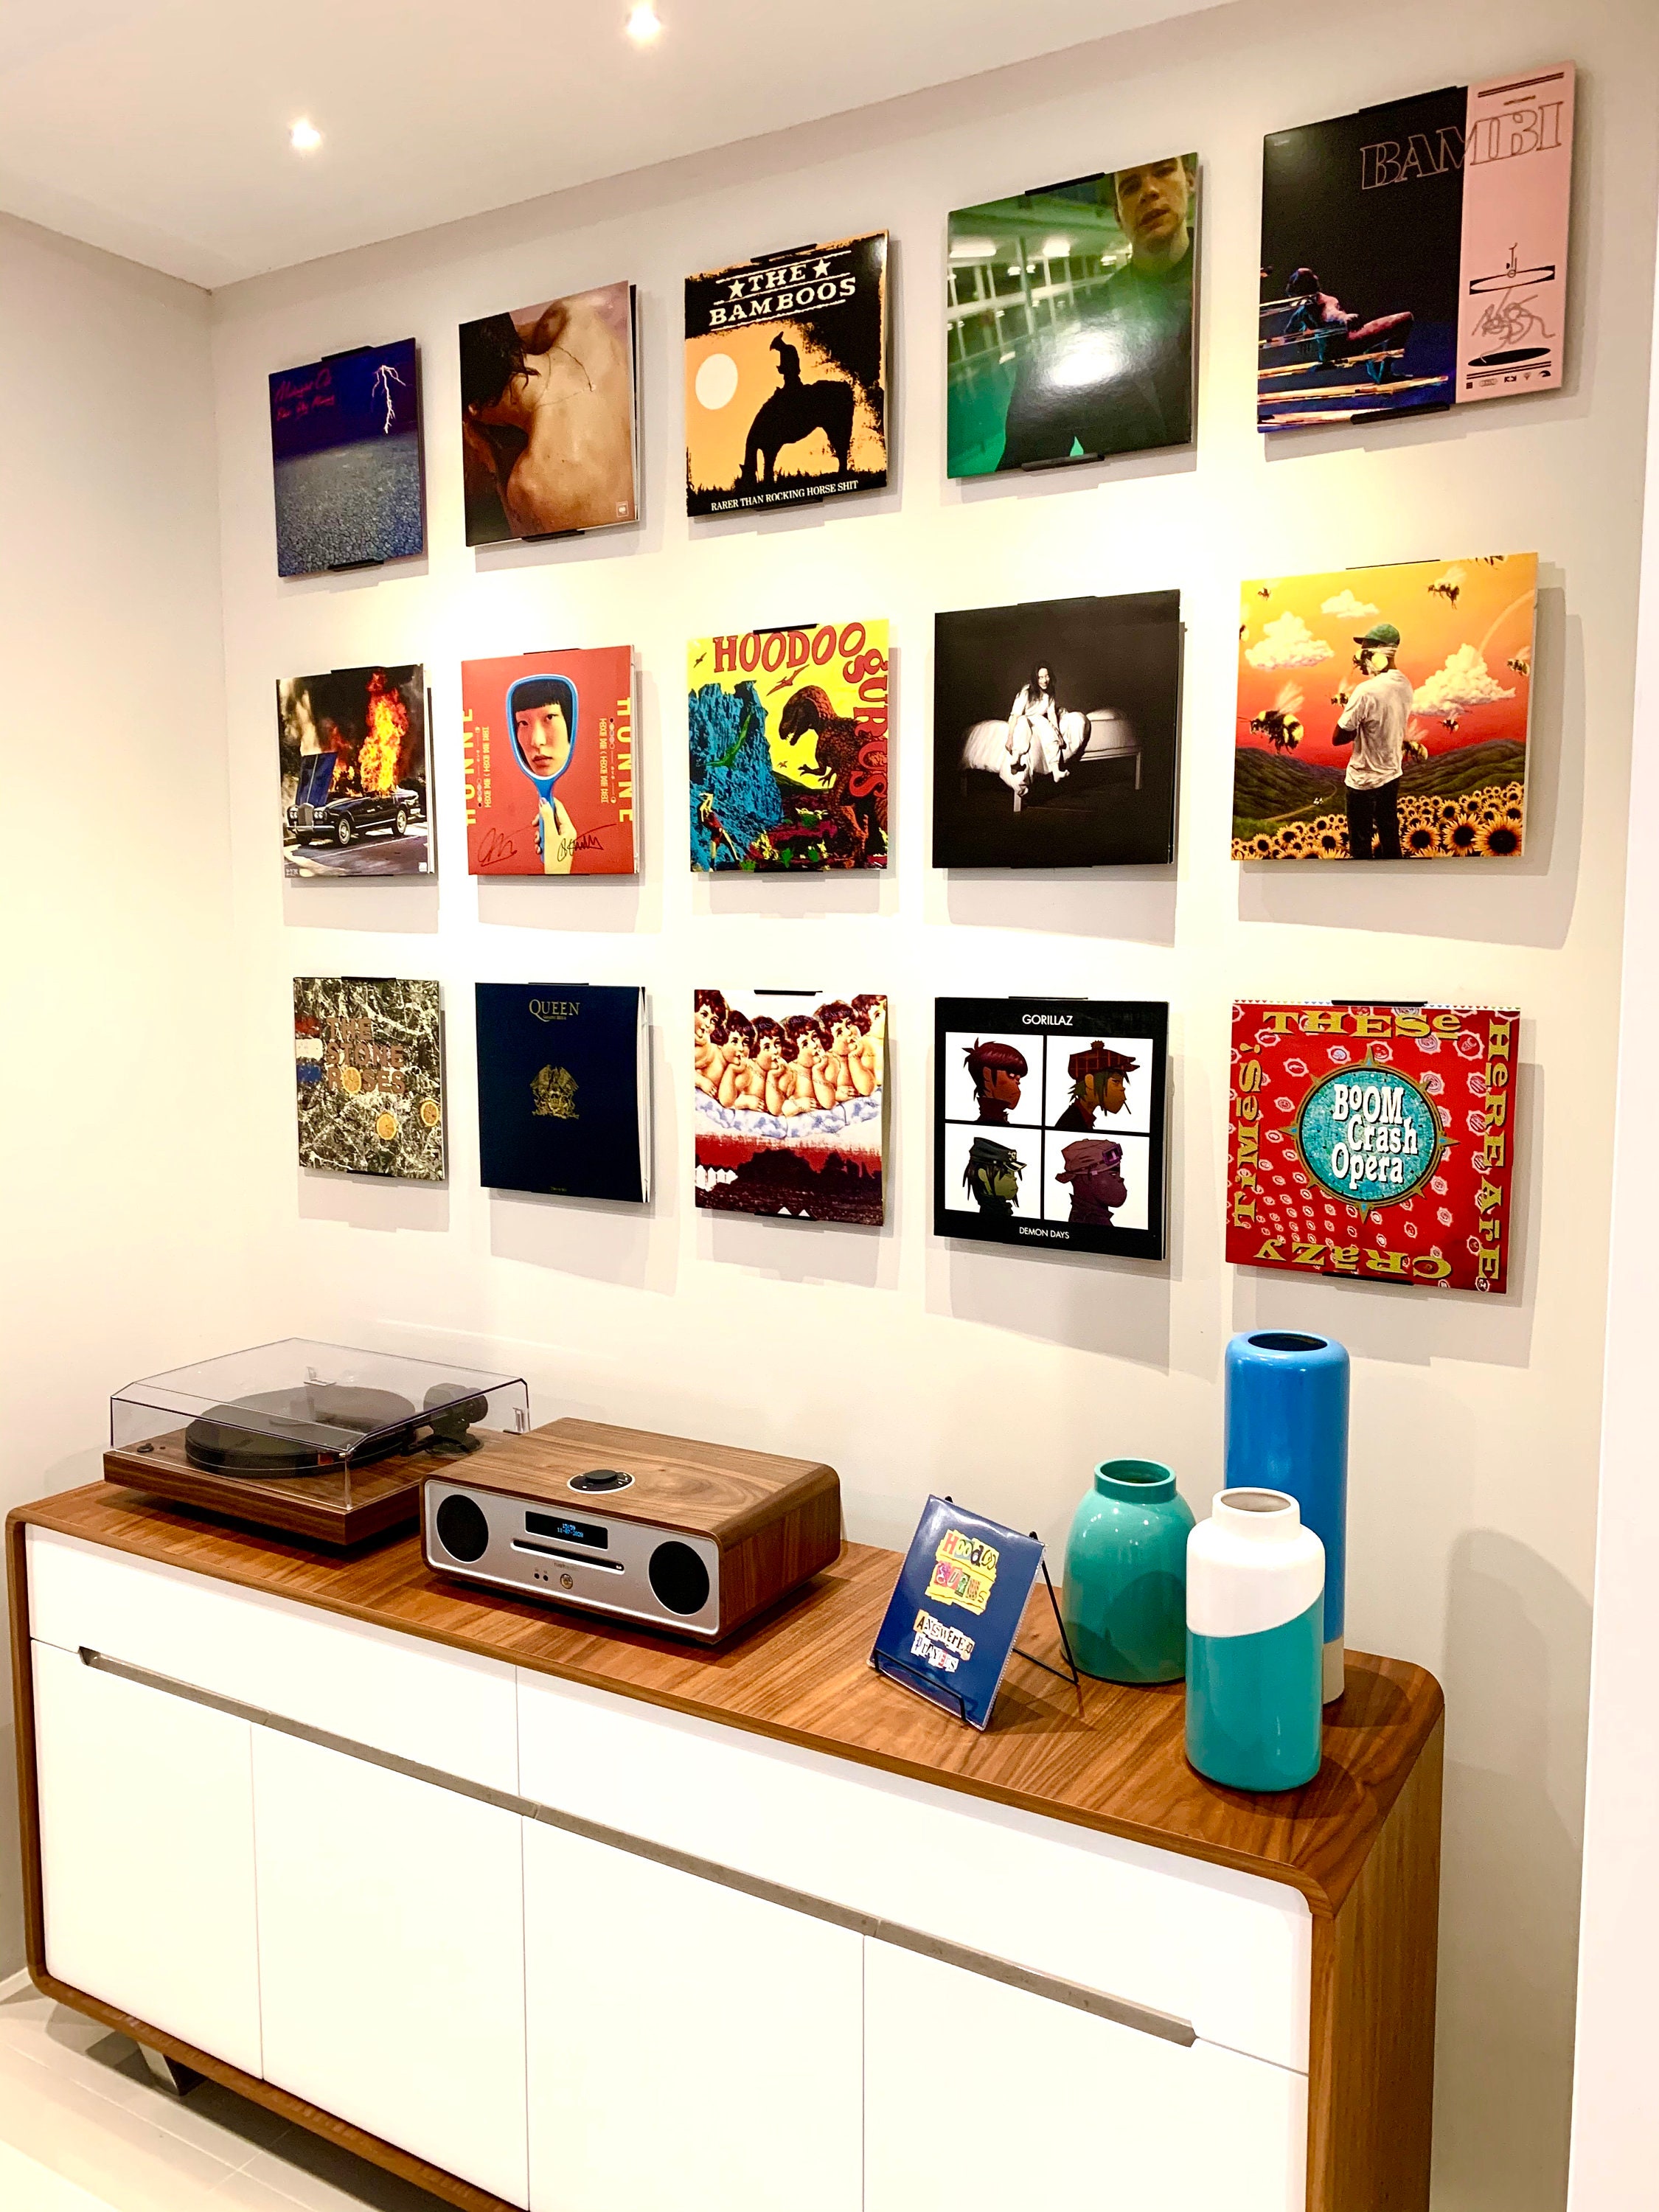 Vinyl Record Display for up to 60 Albums